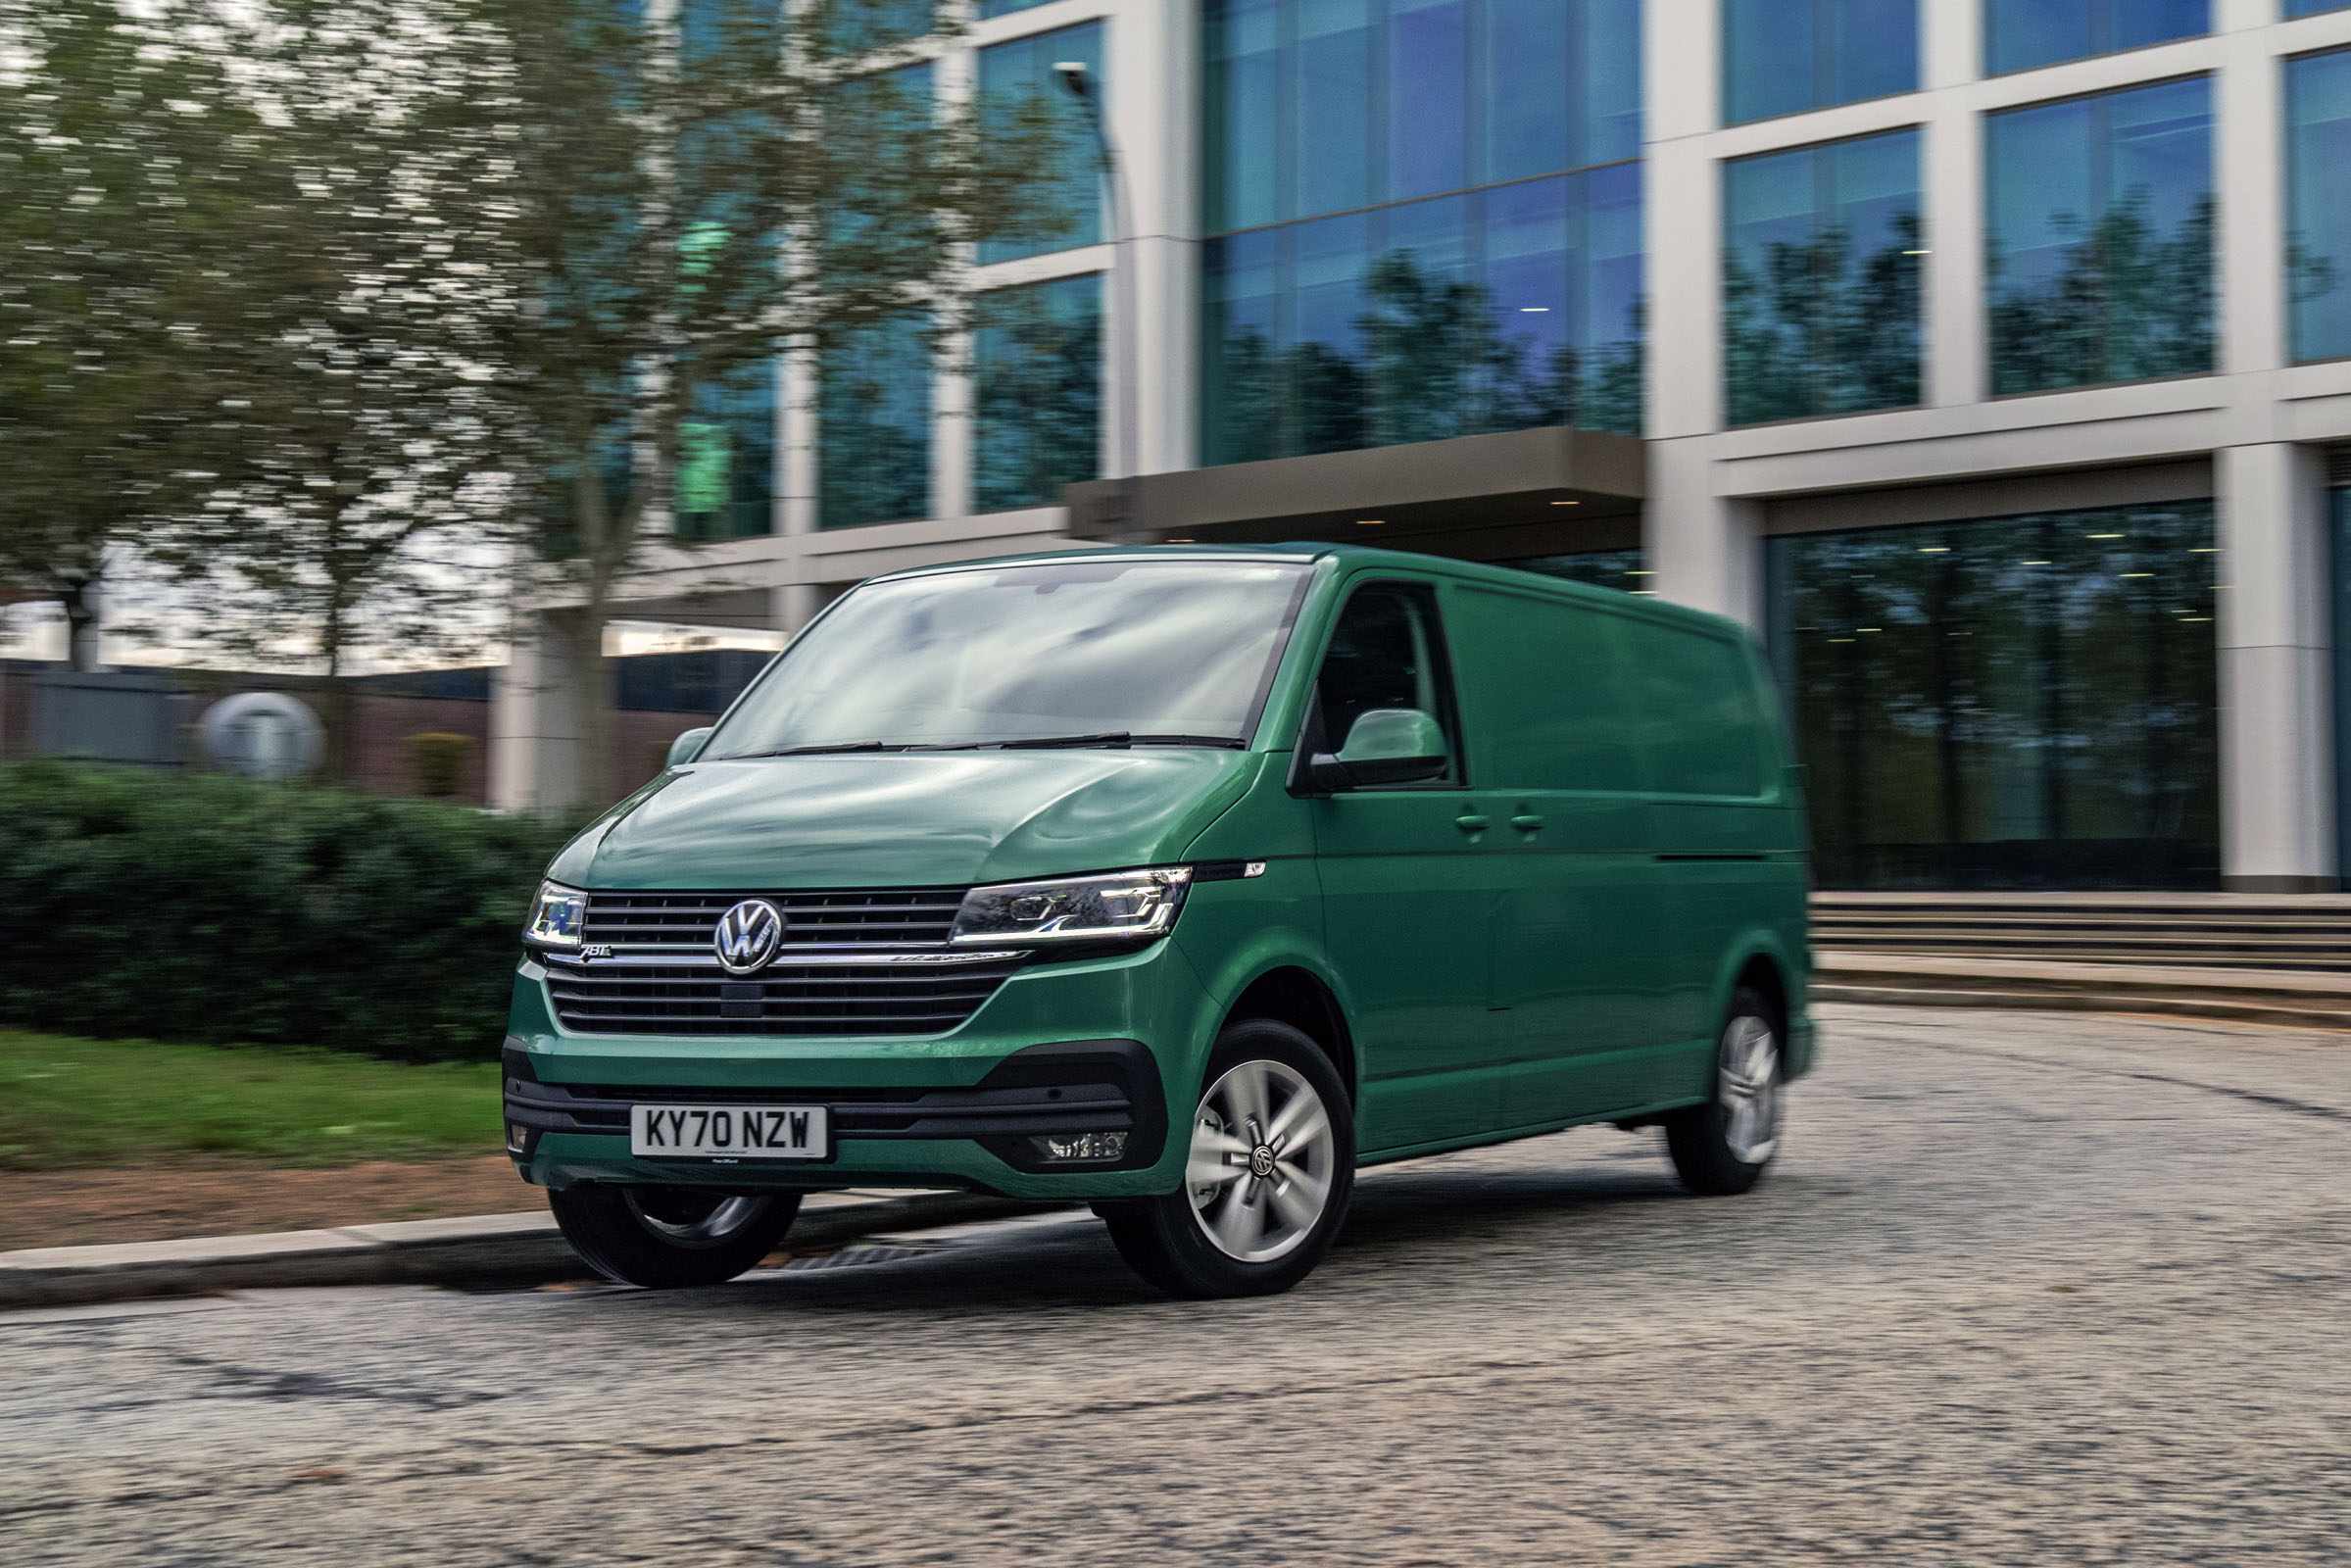 VW Transporter electric: prices, specification and on-sale date